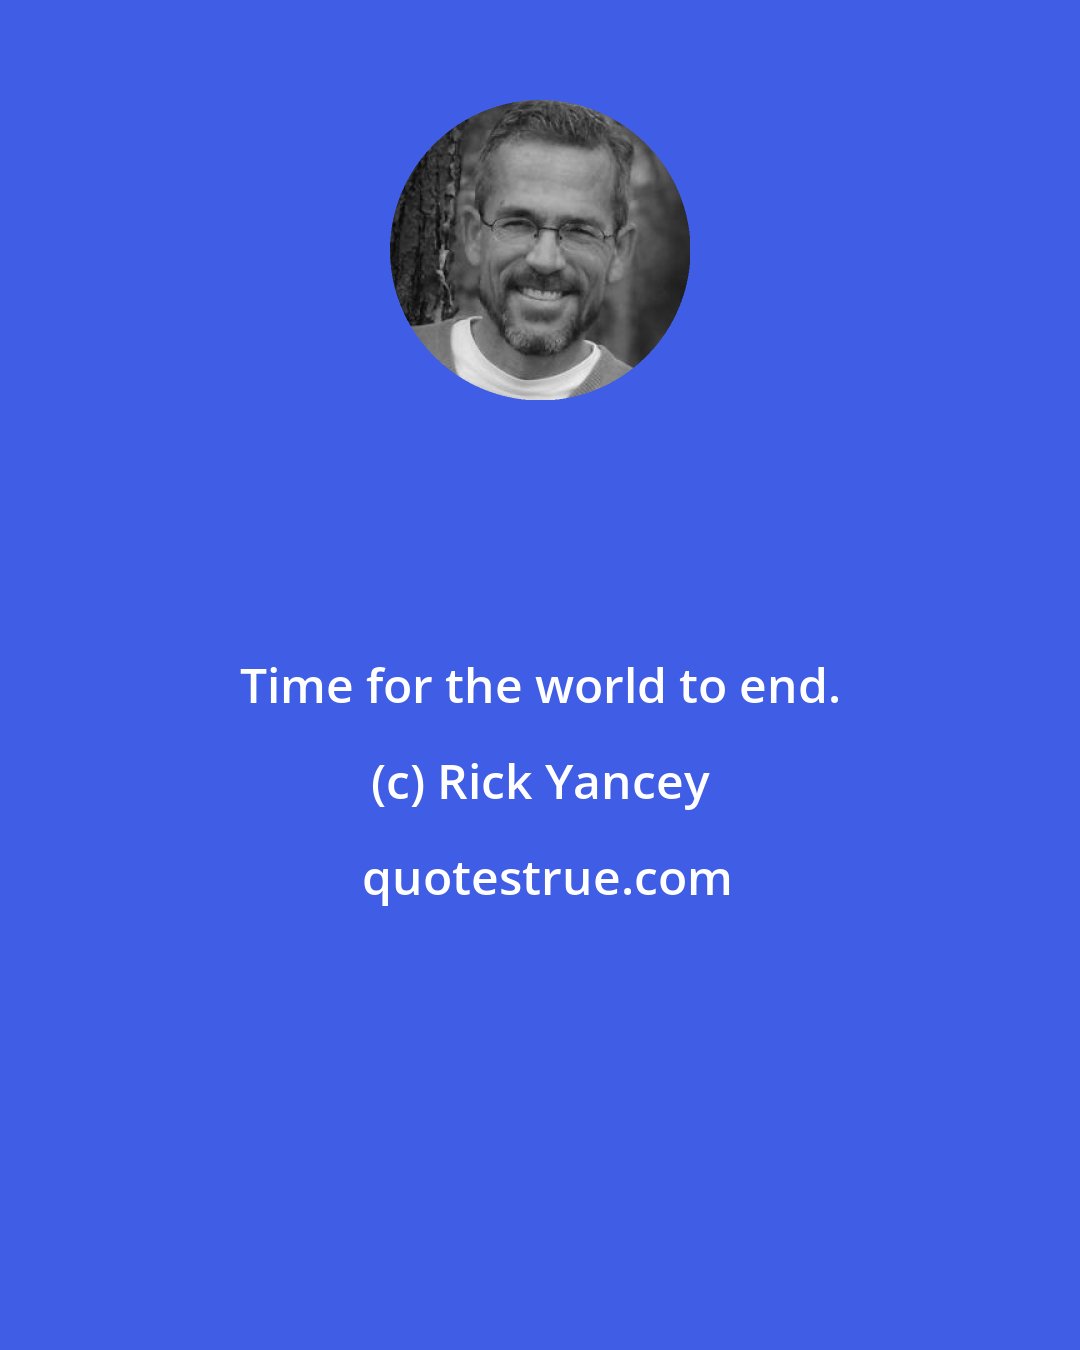 Rick Yancey: Time for the world to end.